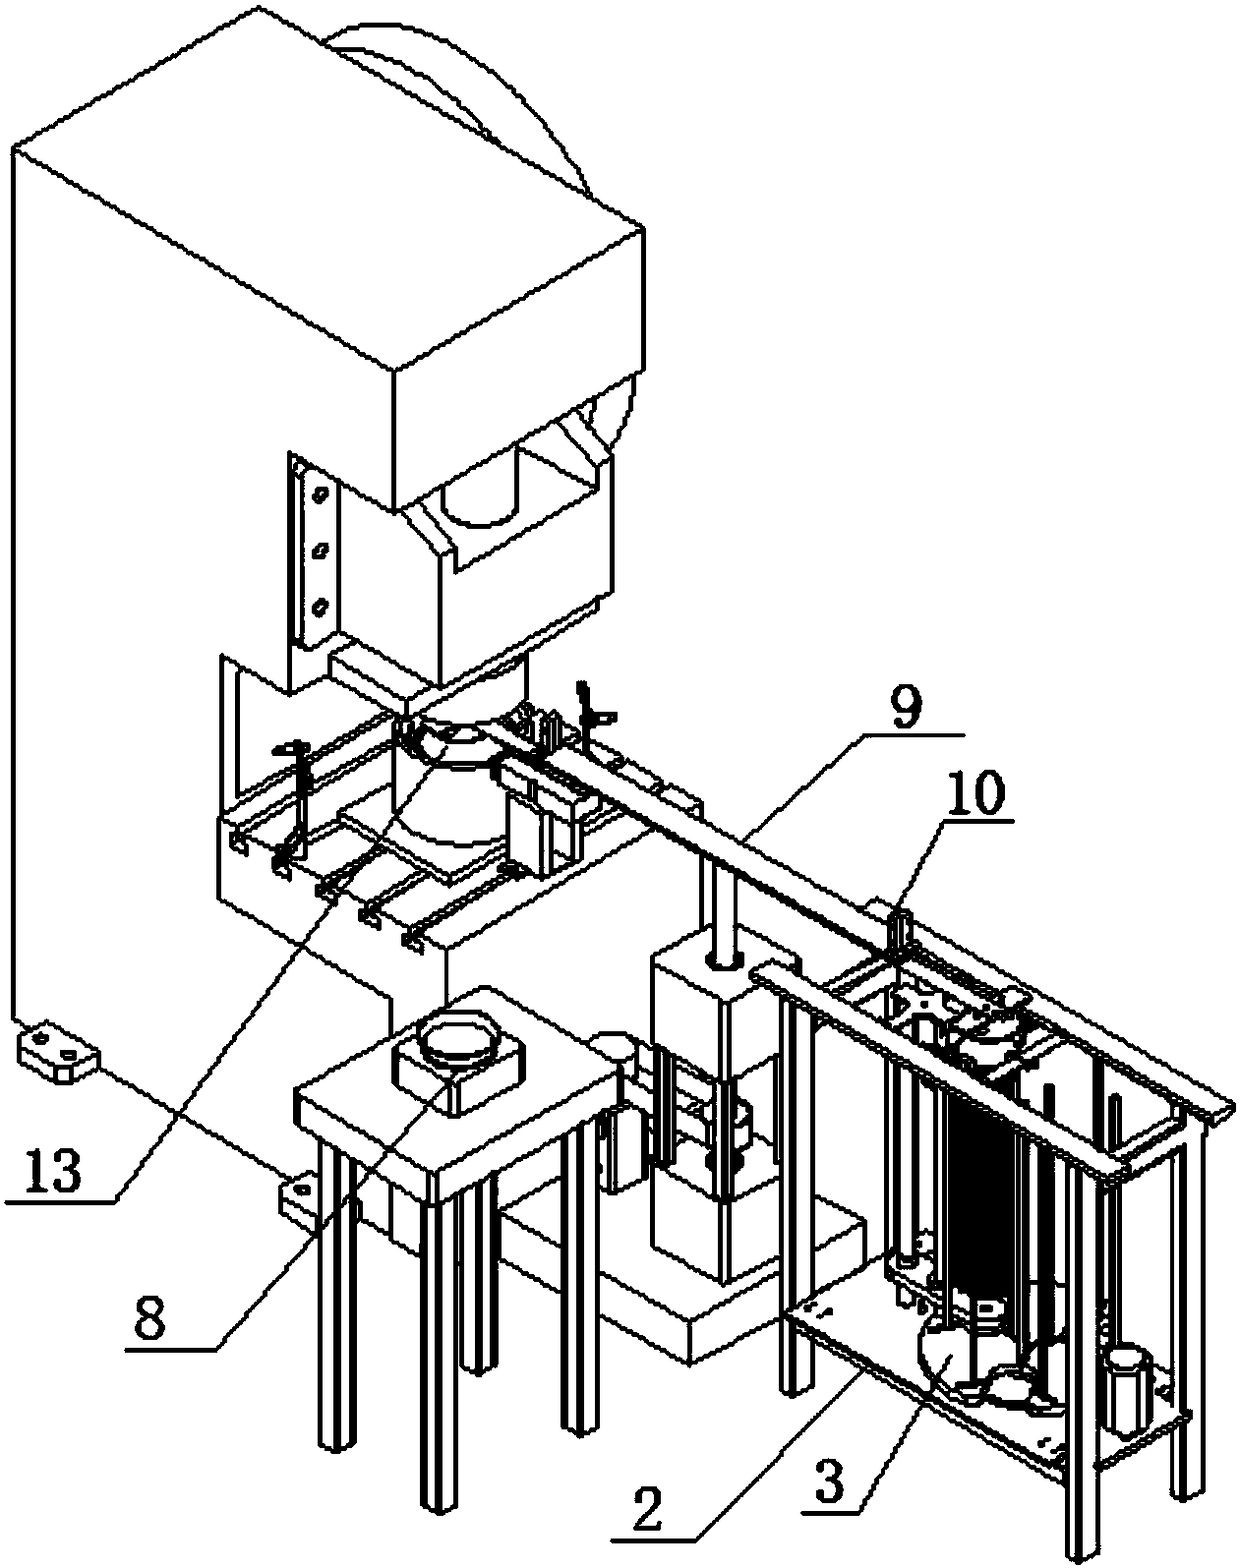 A rotary automatic feeding mechanism for a stamping machine